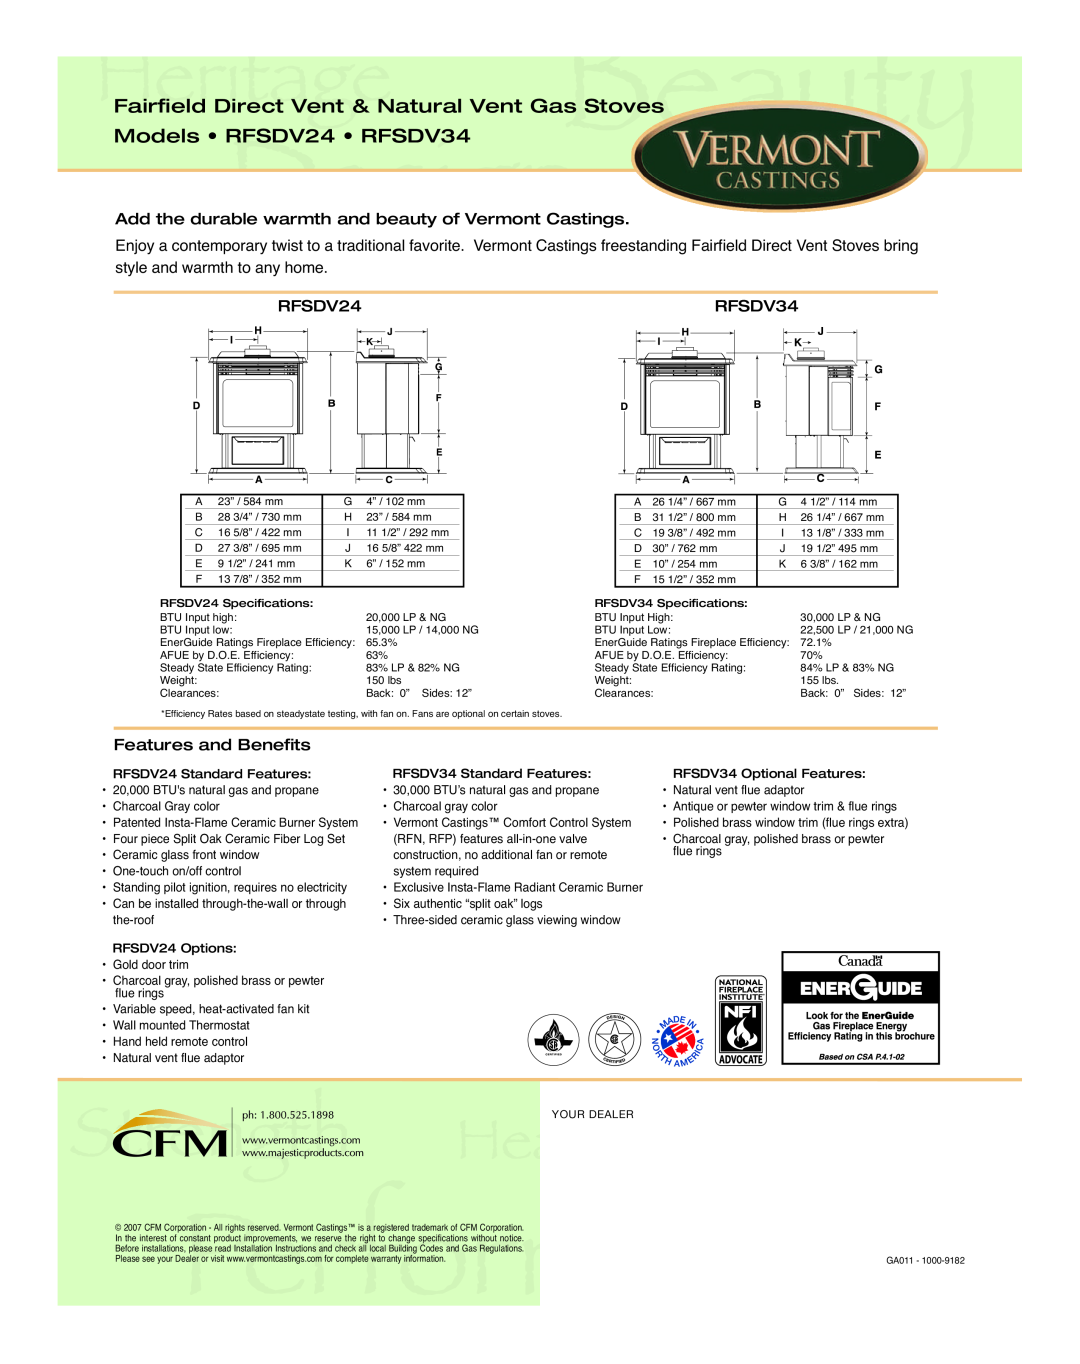 Vermont Casting manual Fairfield Direct Vent & Natural Vent Gas Stoves, Models RFSDV24 RFSDV34, Features and Benefits 